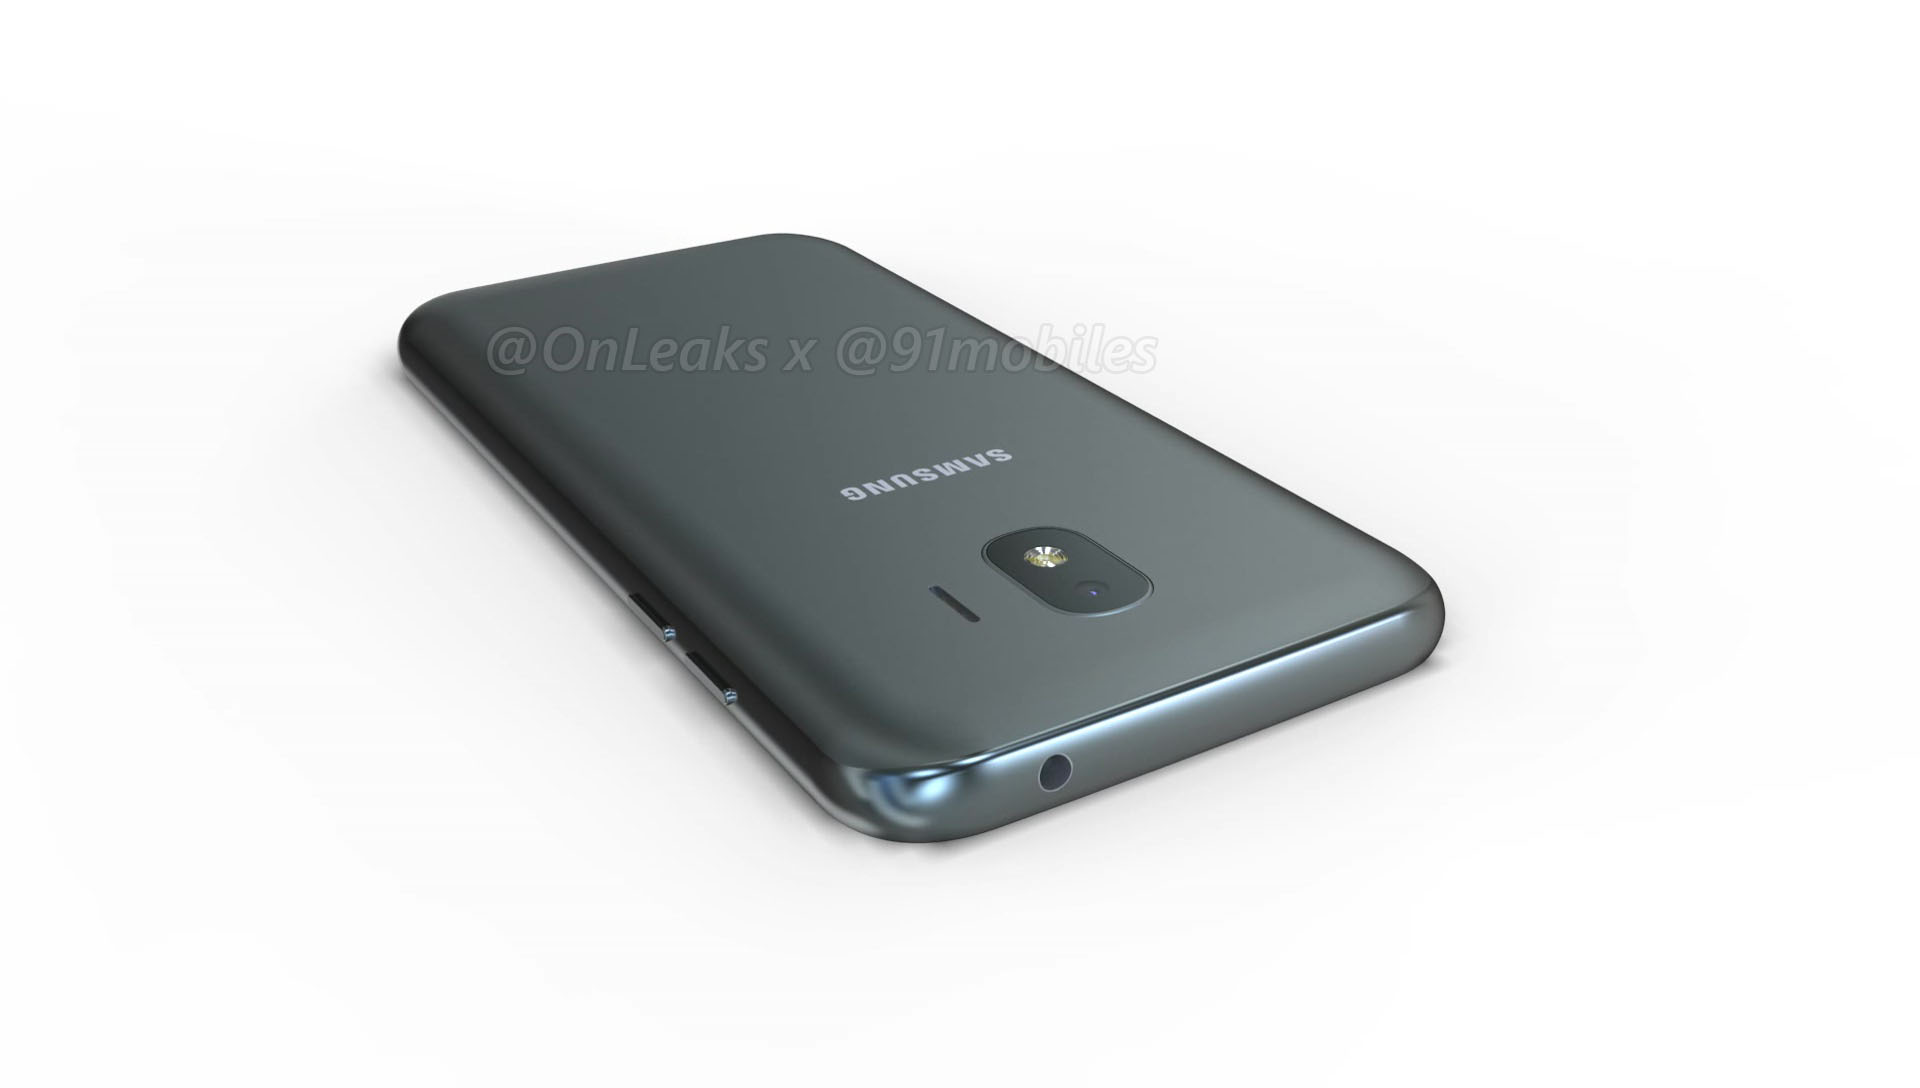 Exclusive: Samsung Galaxy J2 Pro 2018 renders and 360degree video  91mobiles.com